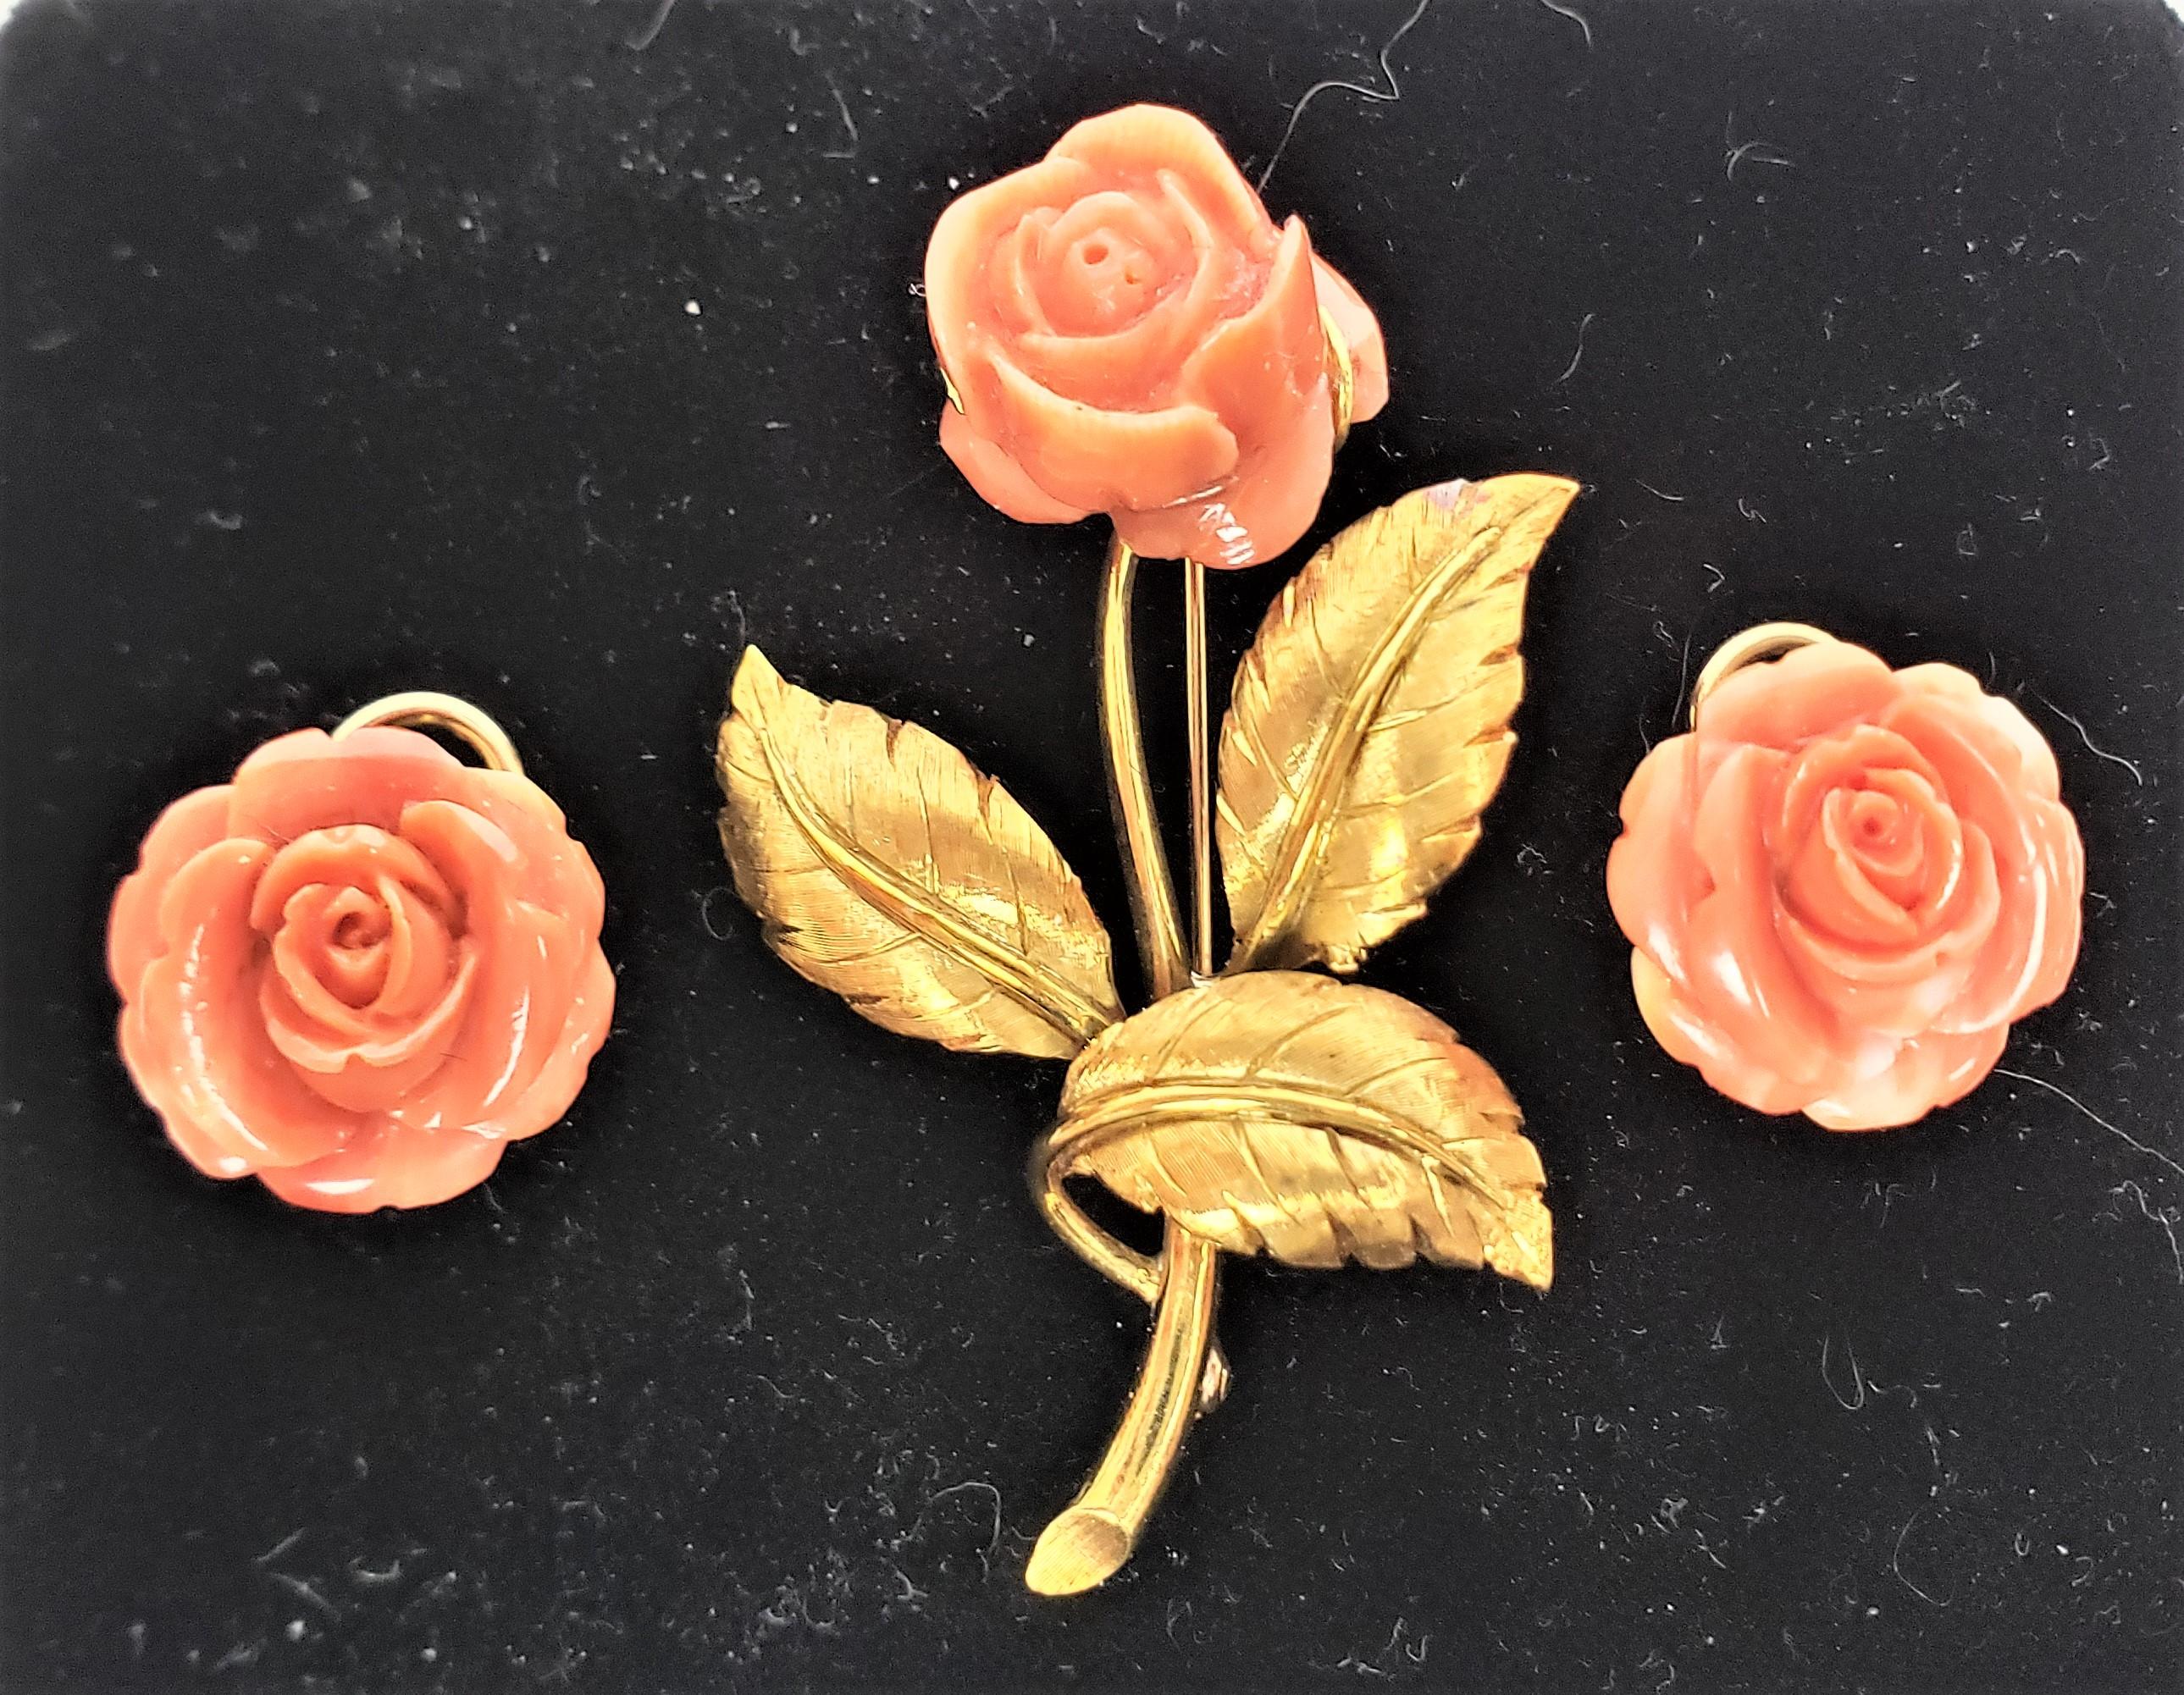 This antique brooch was retailed by Tiffany & Co., but originated from italy and date to approximately 1920 and done in a Naturalistic style. The origins of the matching earrings is unknown, and are done in the same style. The brooch is a figural